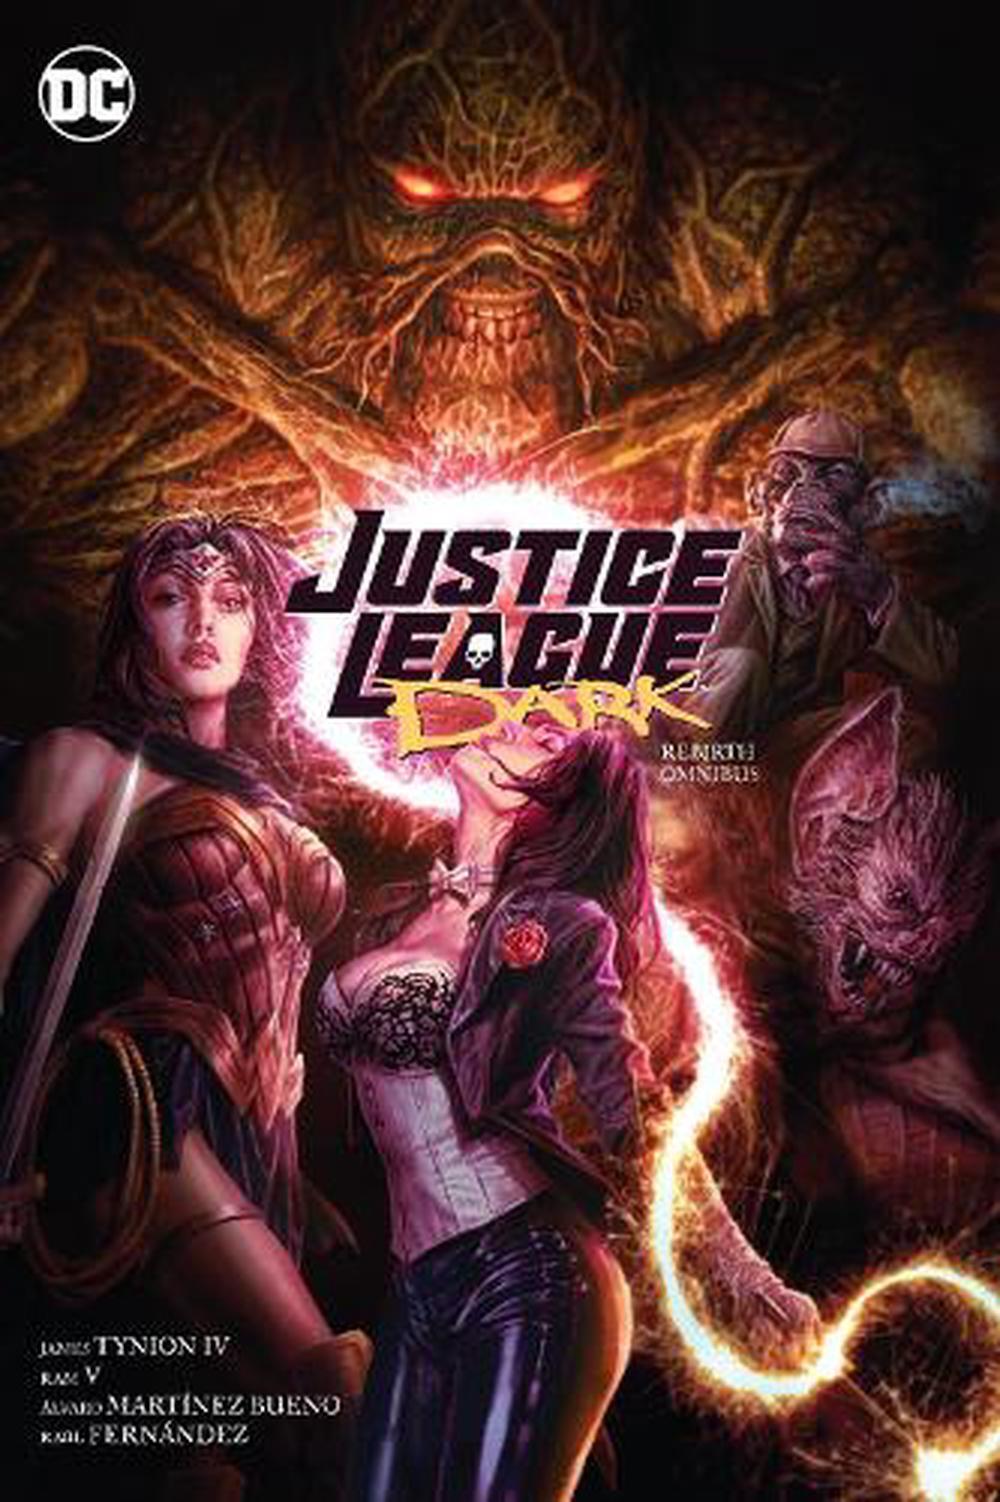 Justice League Dark: Rebirth Omnibus by James Tynion IV Hardcover Book